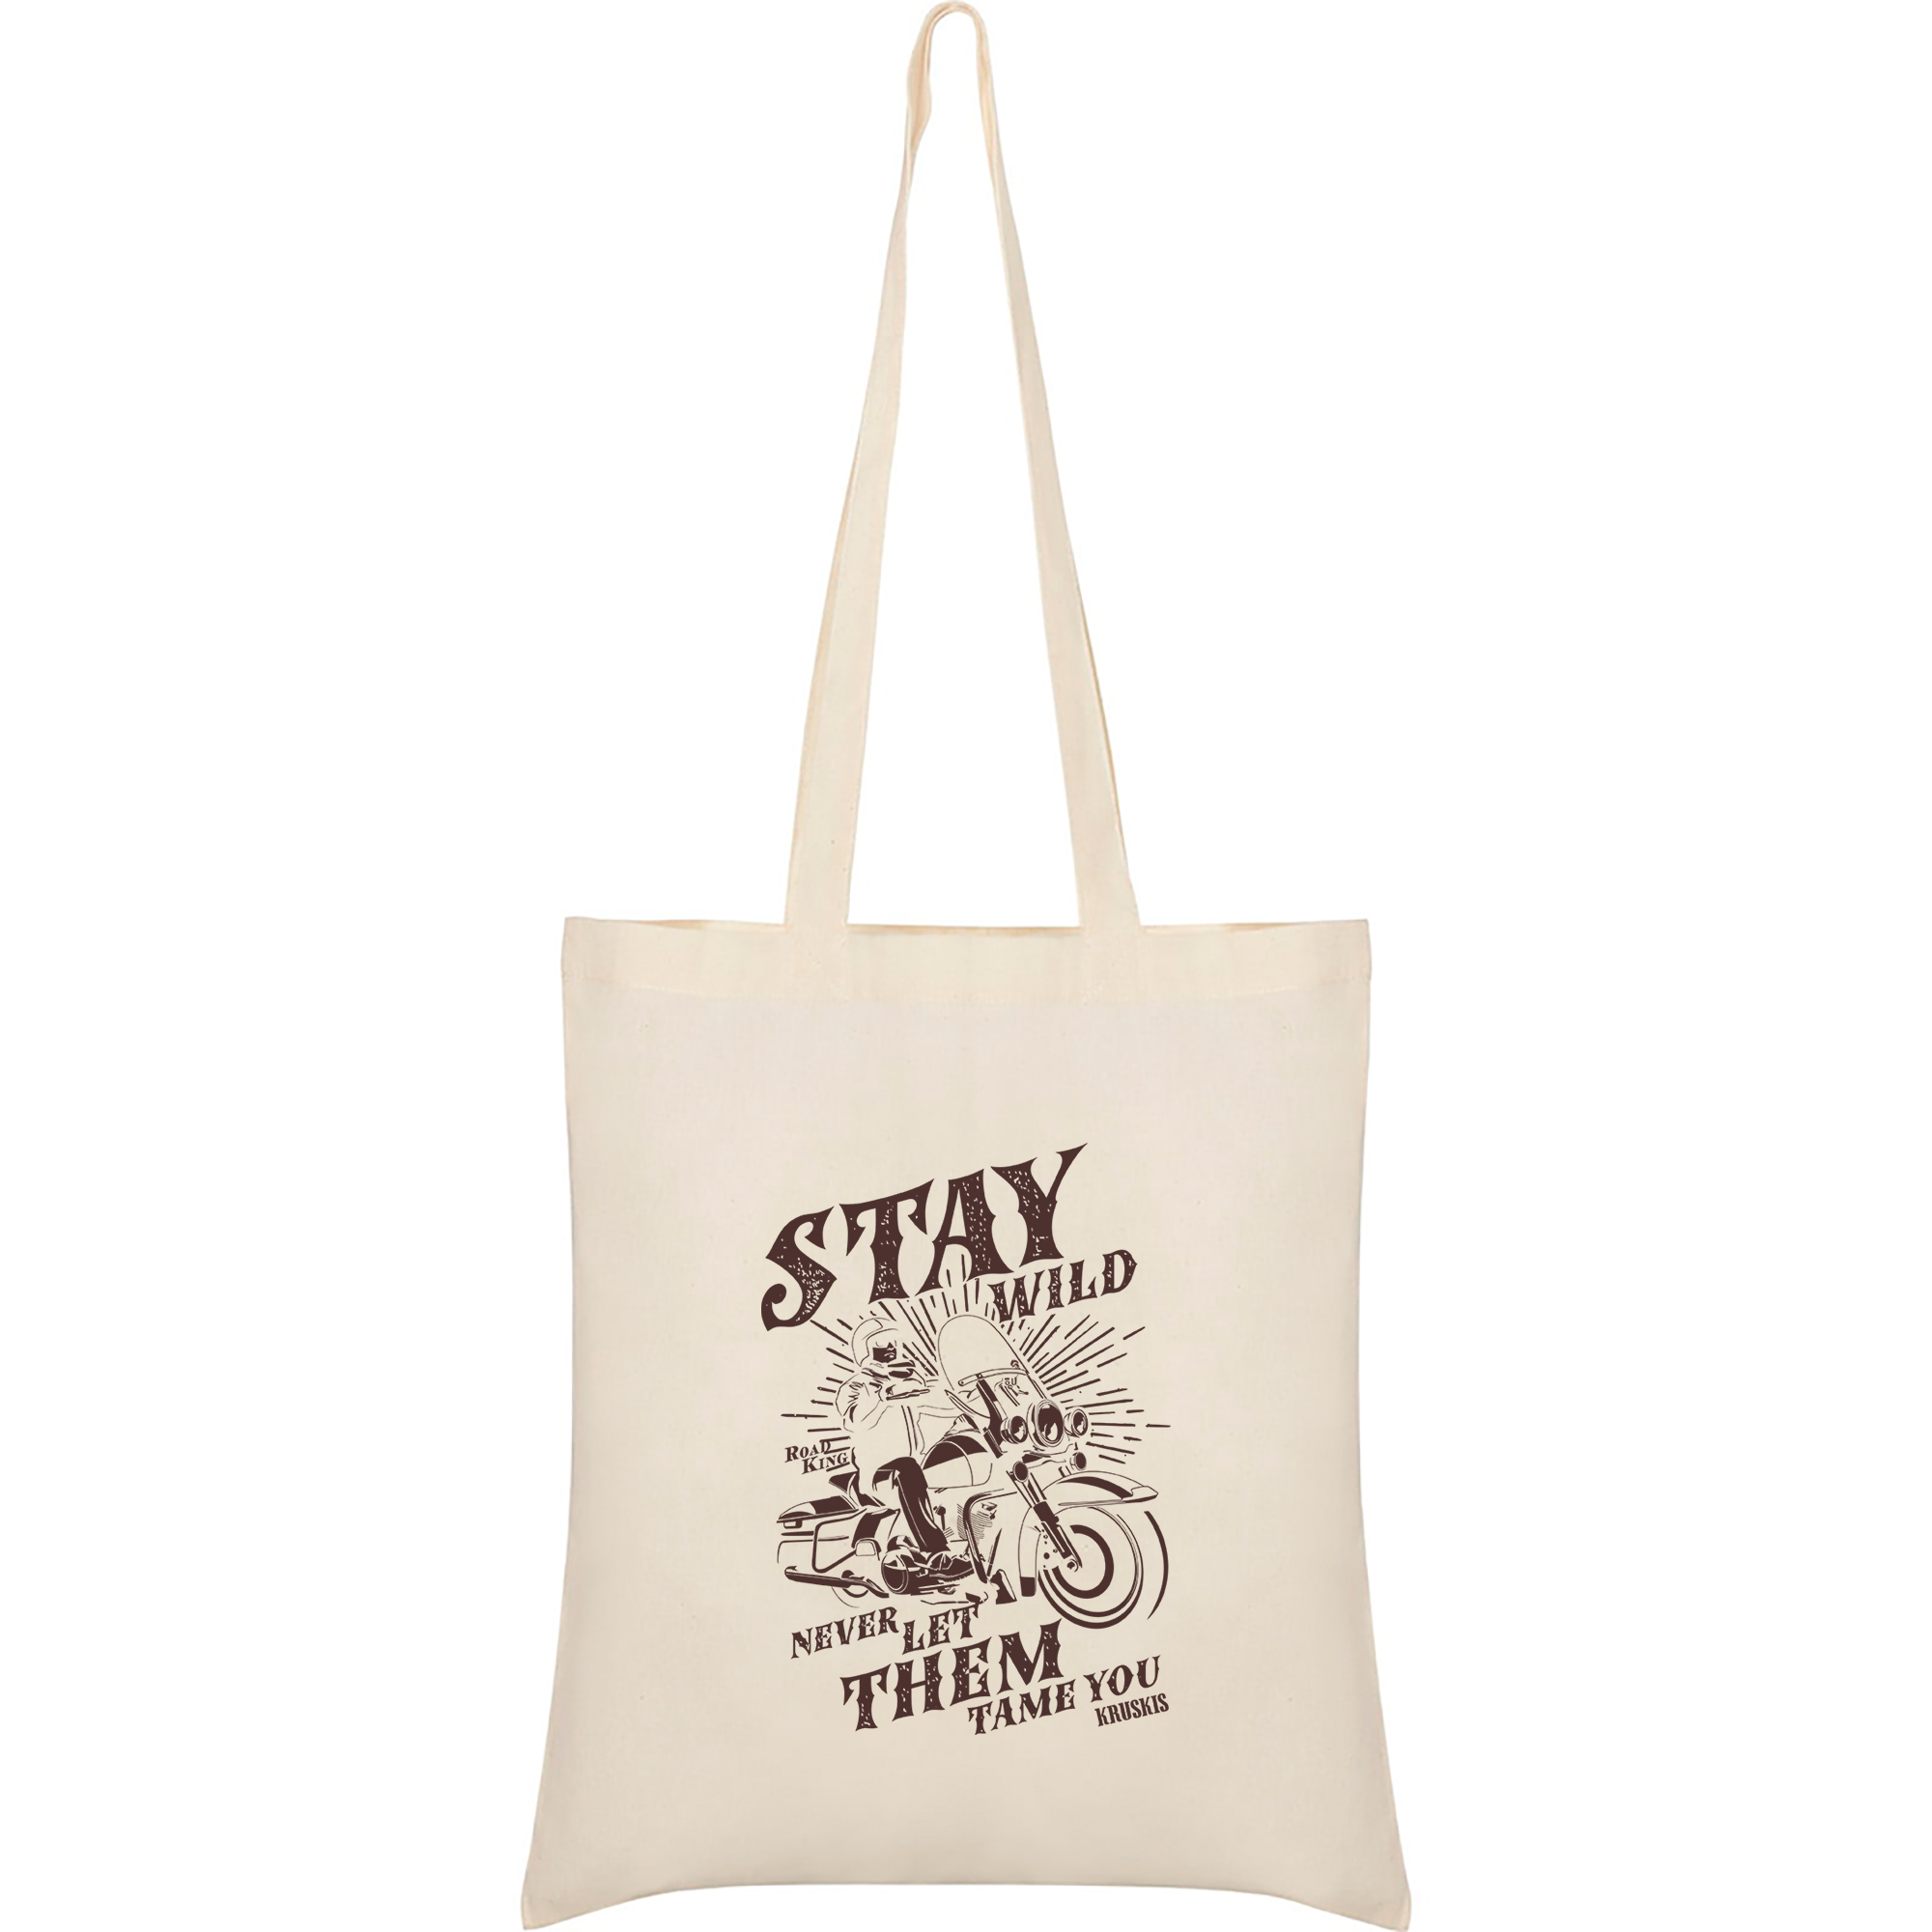 Bag Cotton Motorcycling Stay Wild Unisex